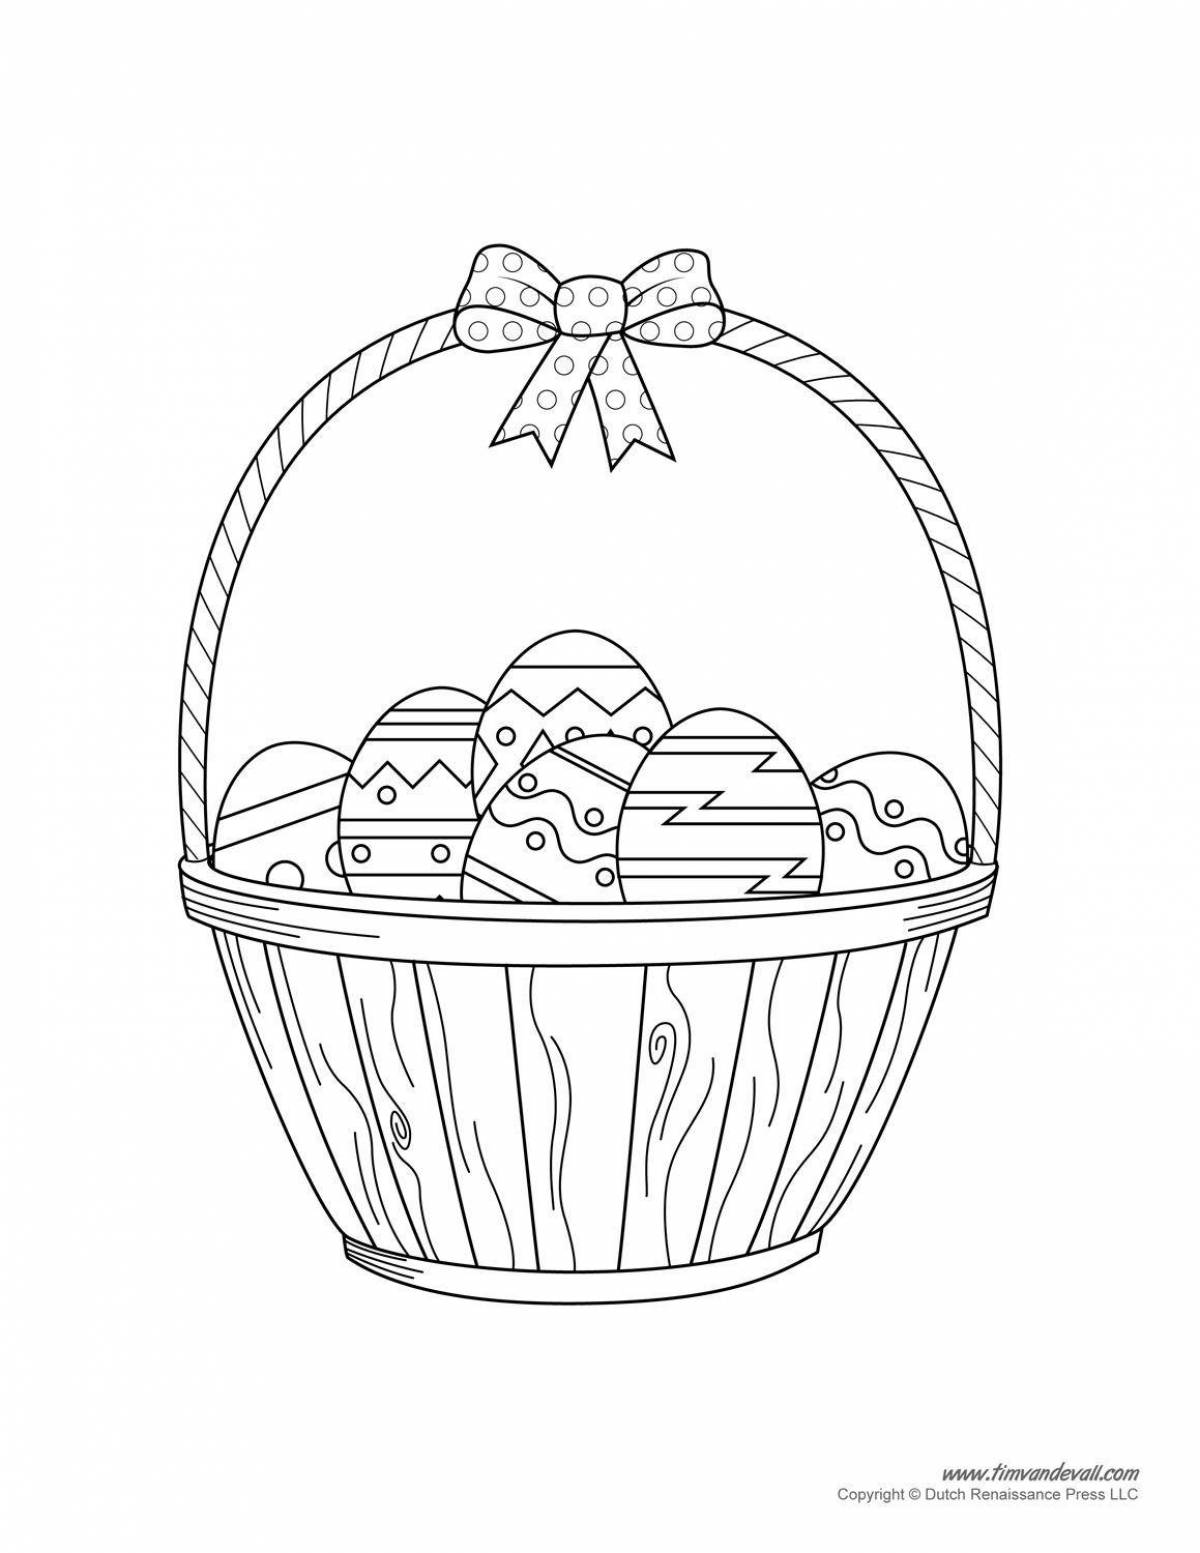 Colorful empty basket coloring book for kids